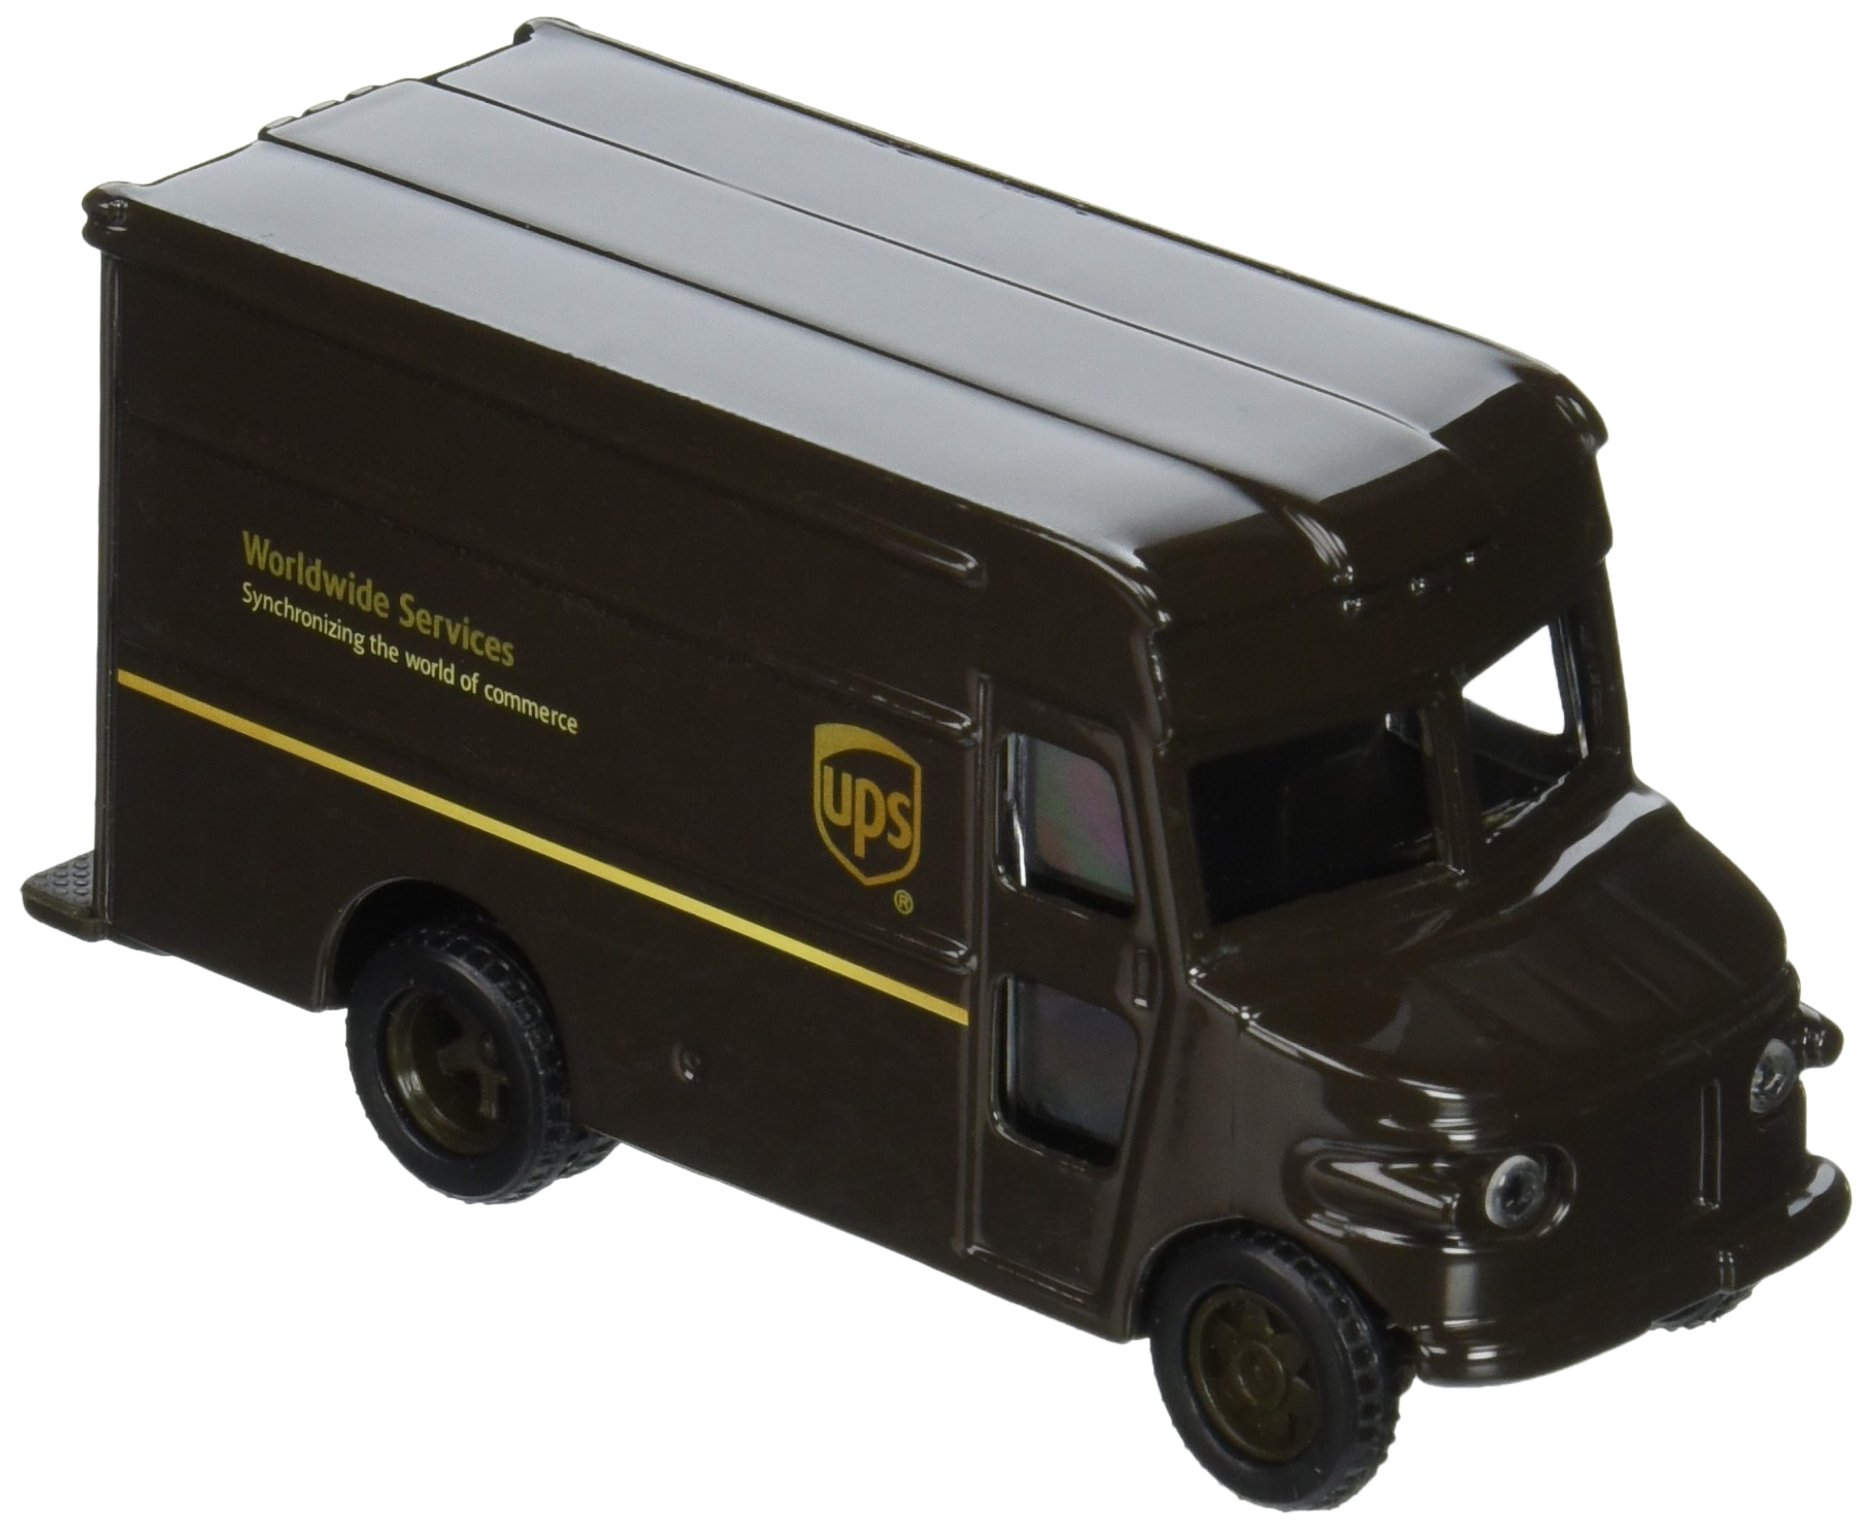 Ups Truck Clipart | Free download best Ups Truck Clipart on 